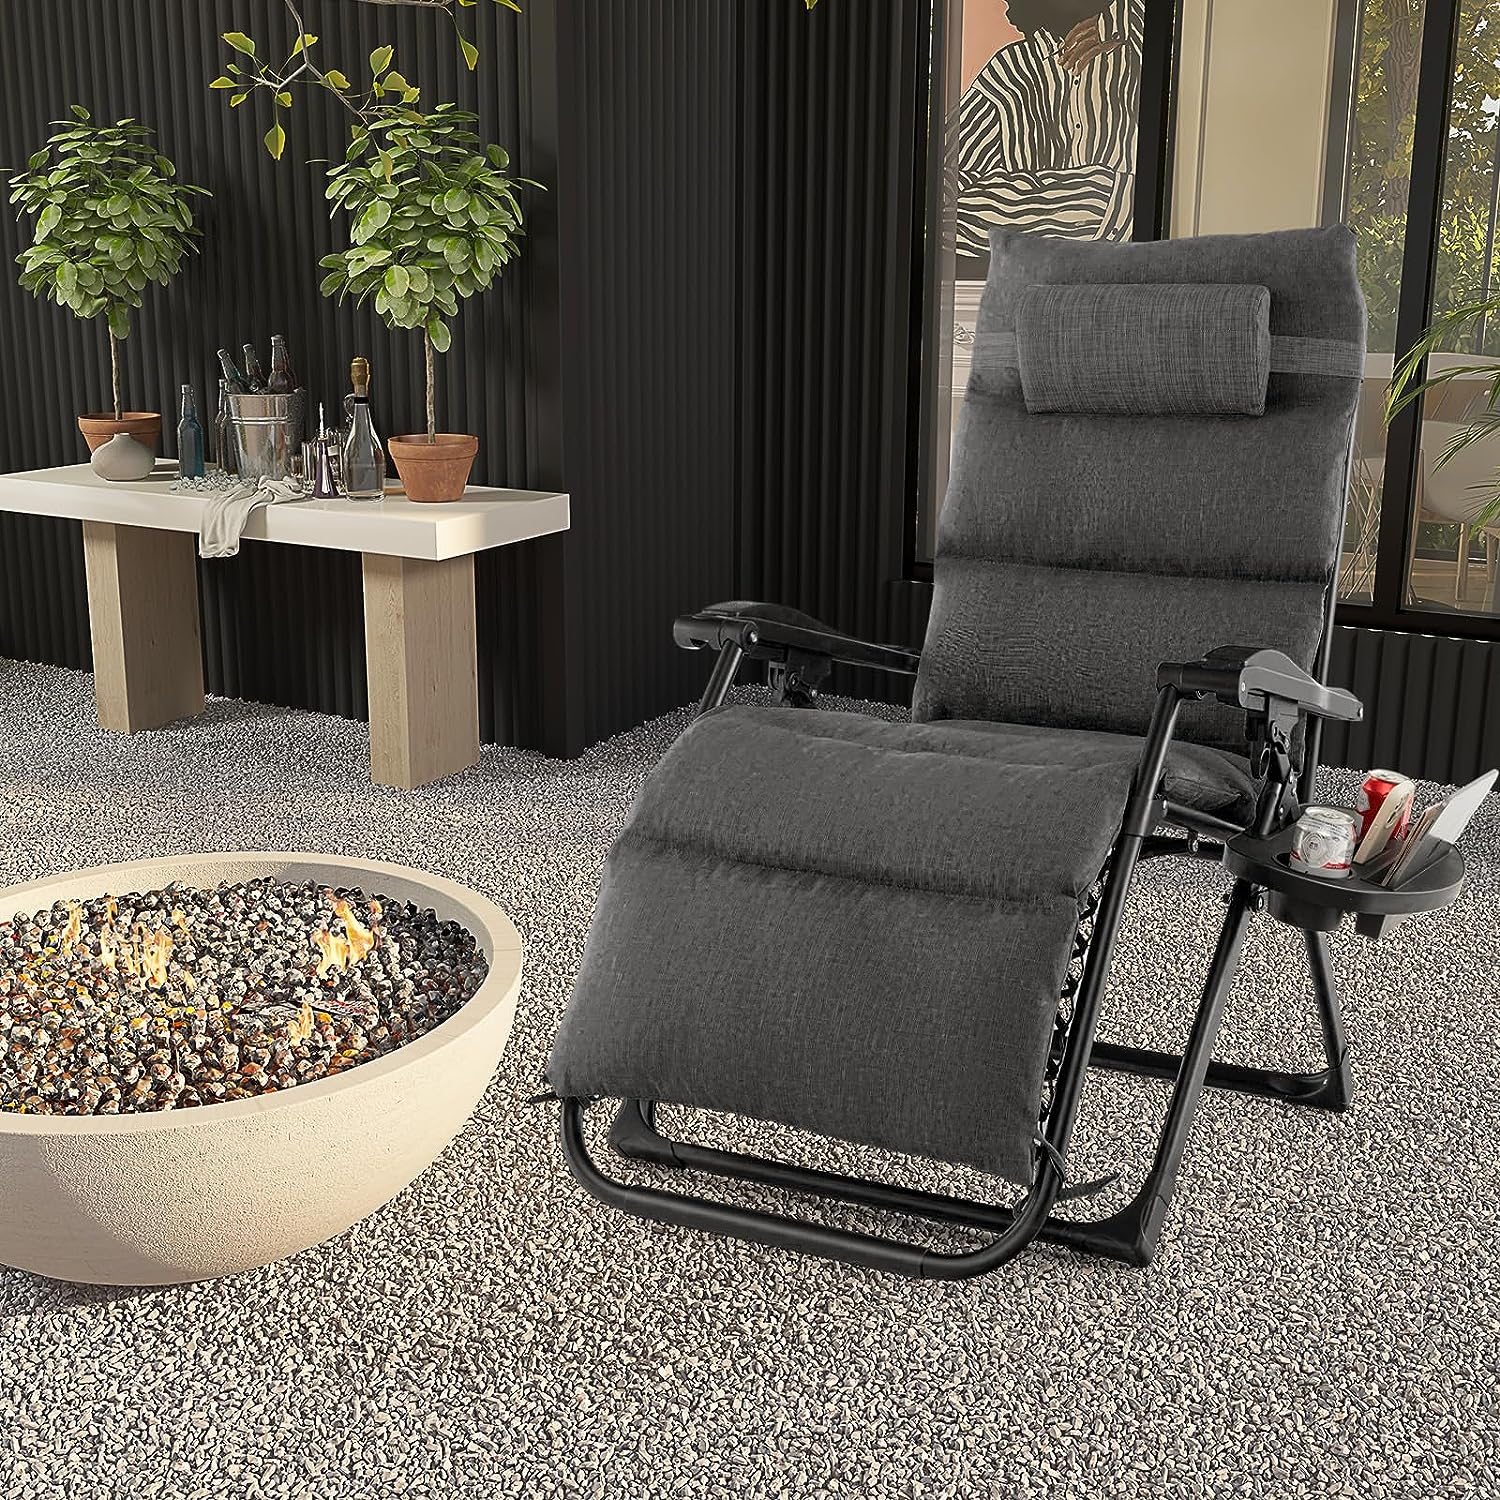 Giantex Zero Gravity Chair with Patio Cushions, Adjustable Folding Reclining Lounge Chair